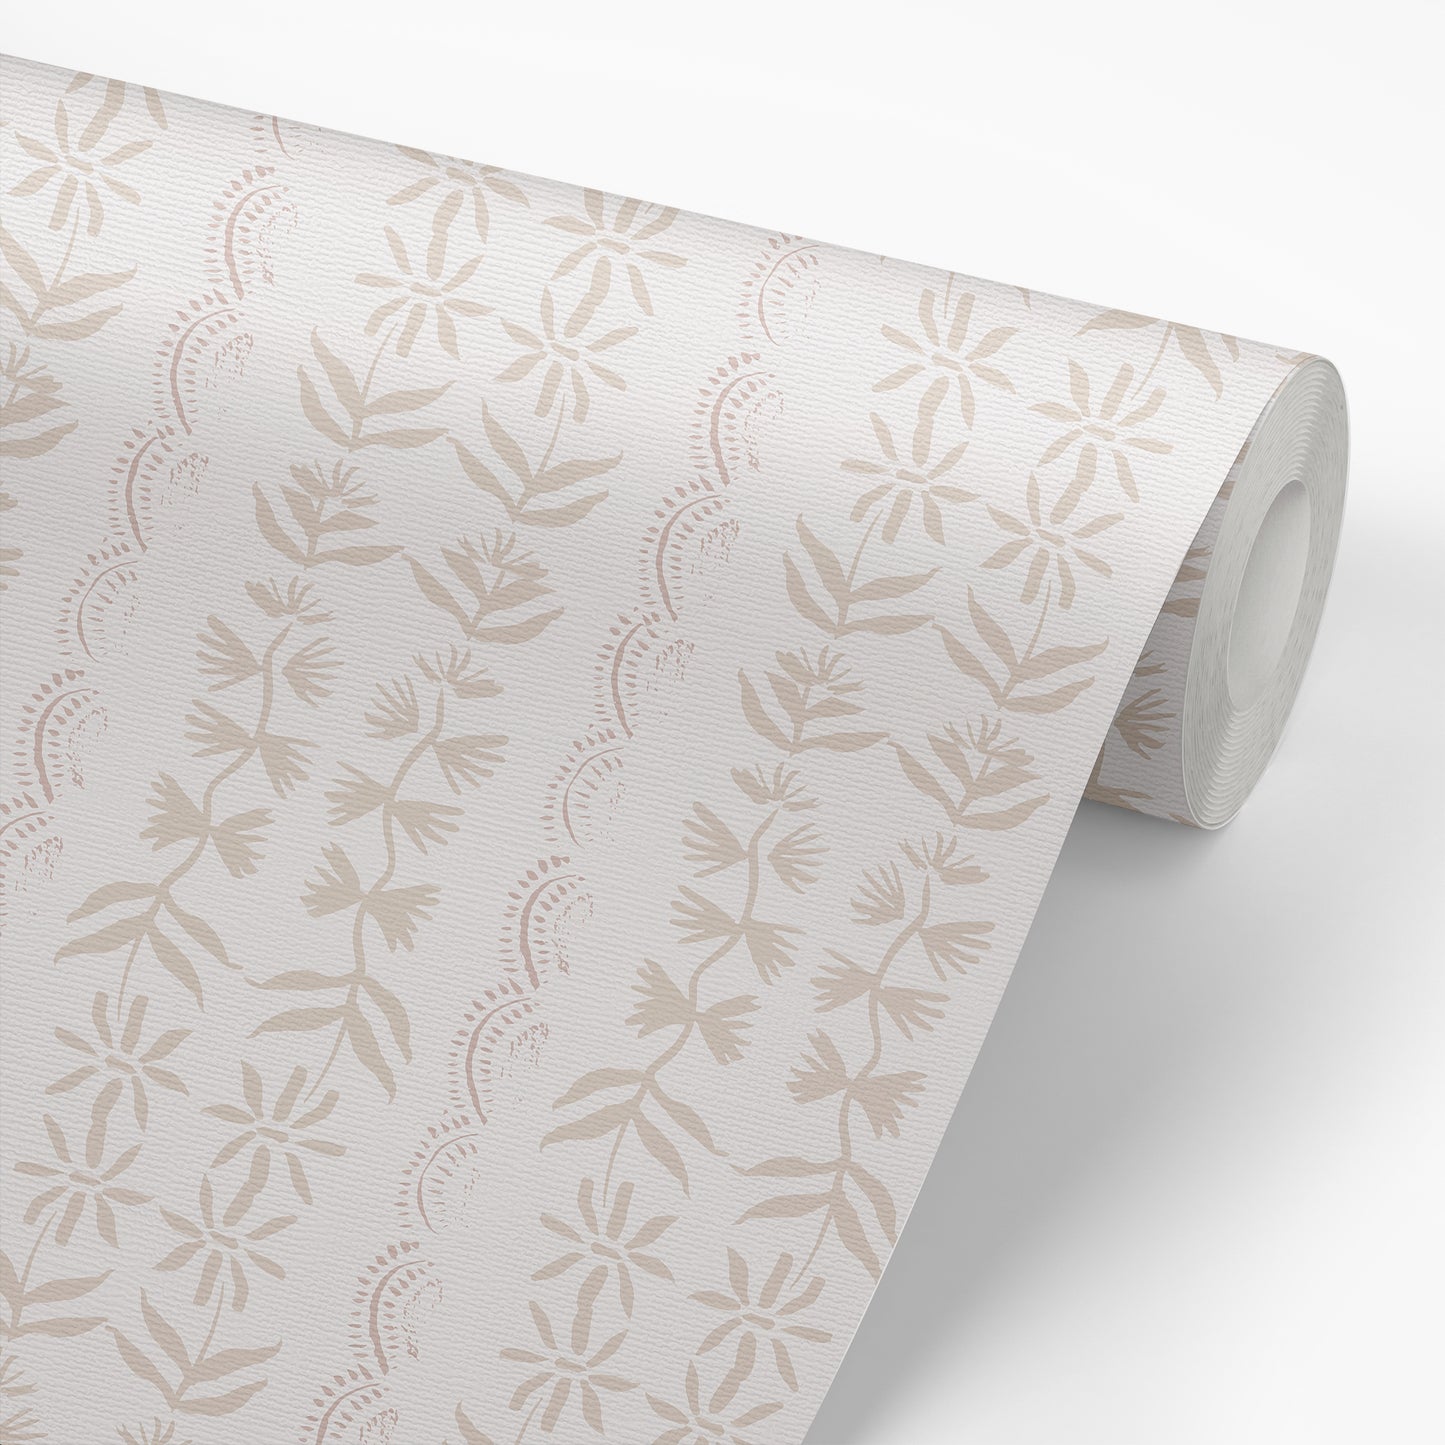 Wallpaper roll featuring Emeline Bone design with elegant neutral colors and hand-painted florals.